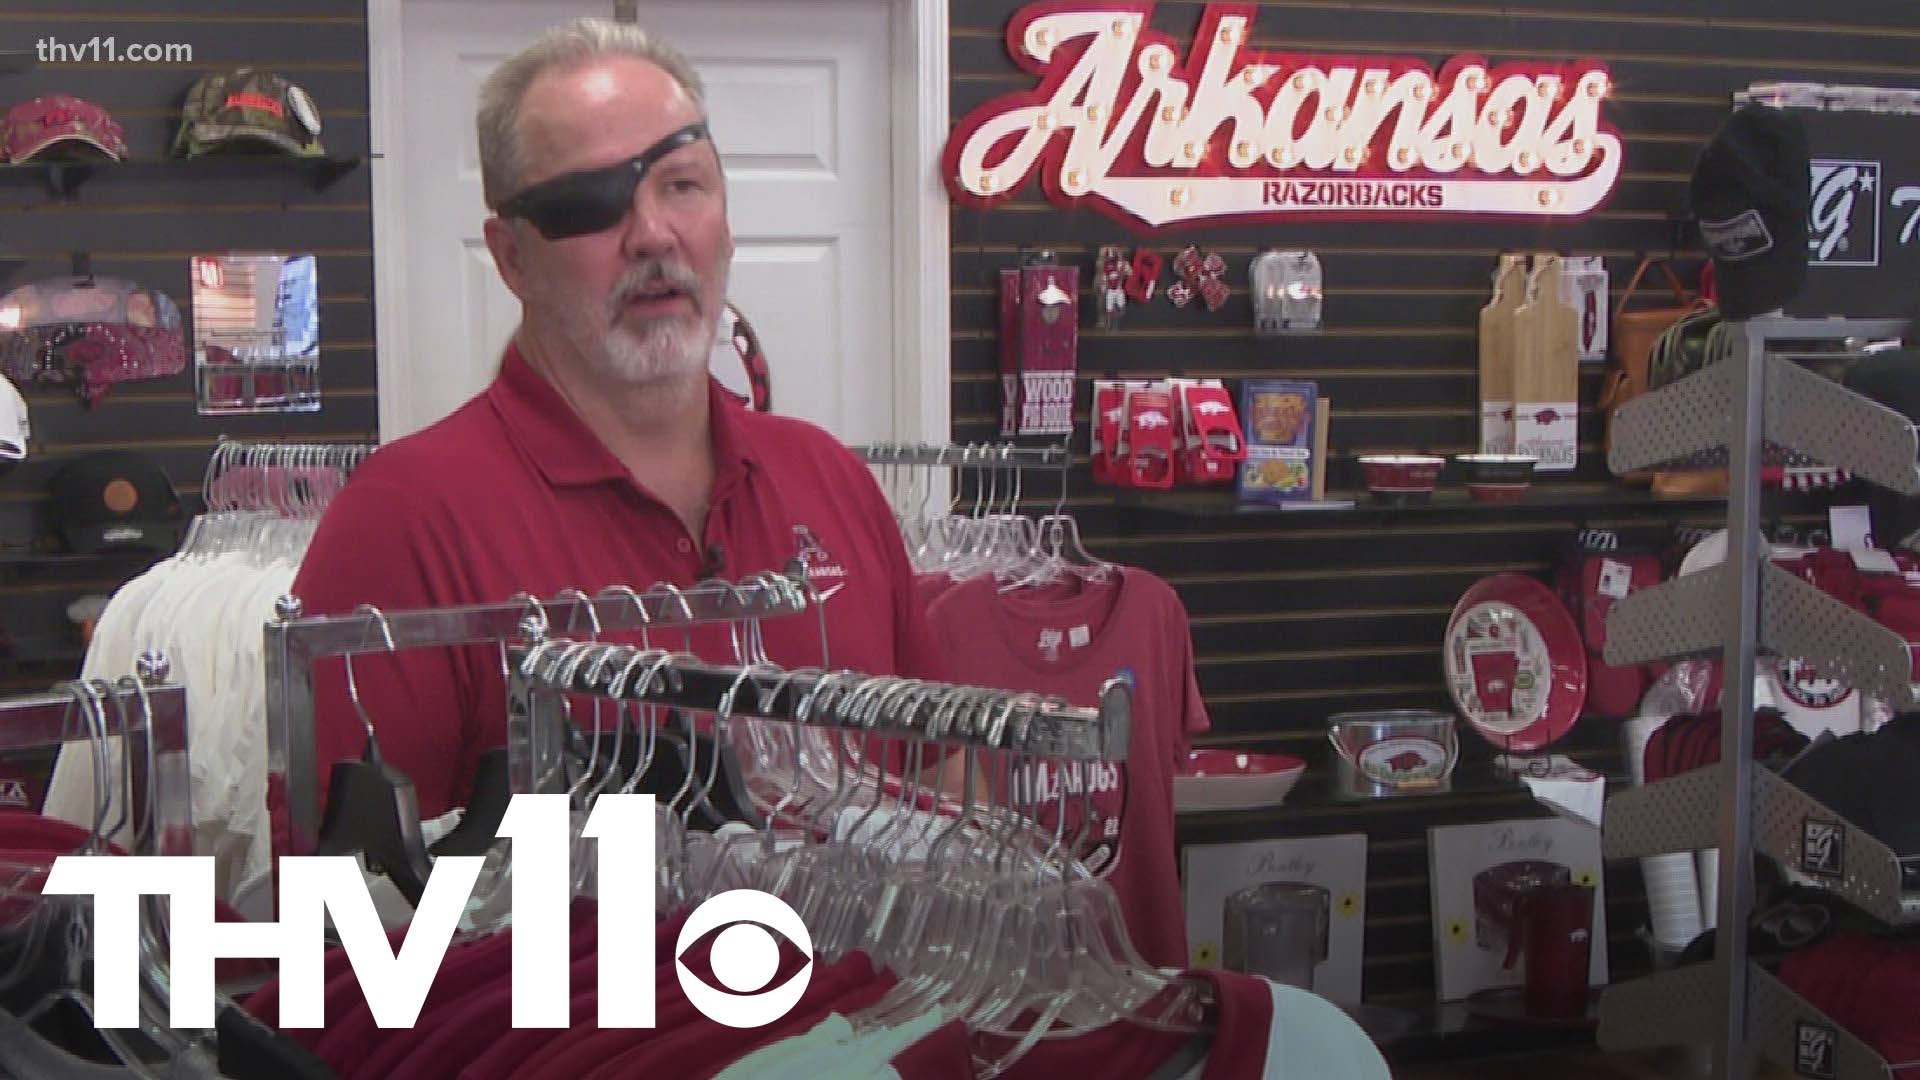 The countdown to Razorback game days has begun and many are gearing up for game days, including Central Arkansas businesses.